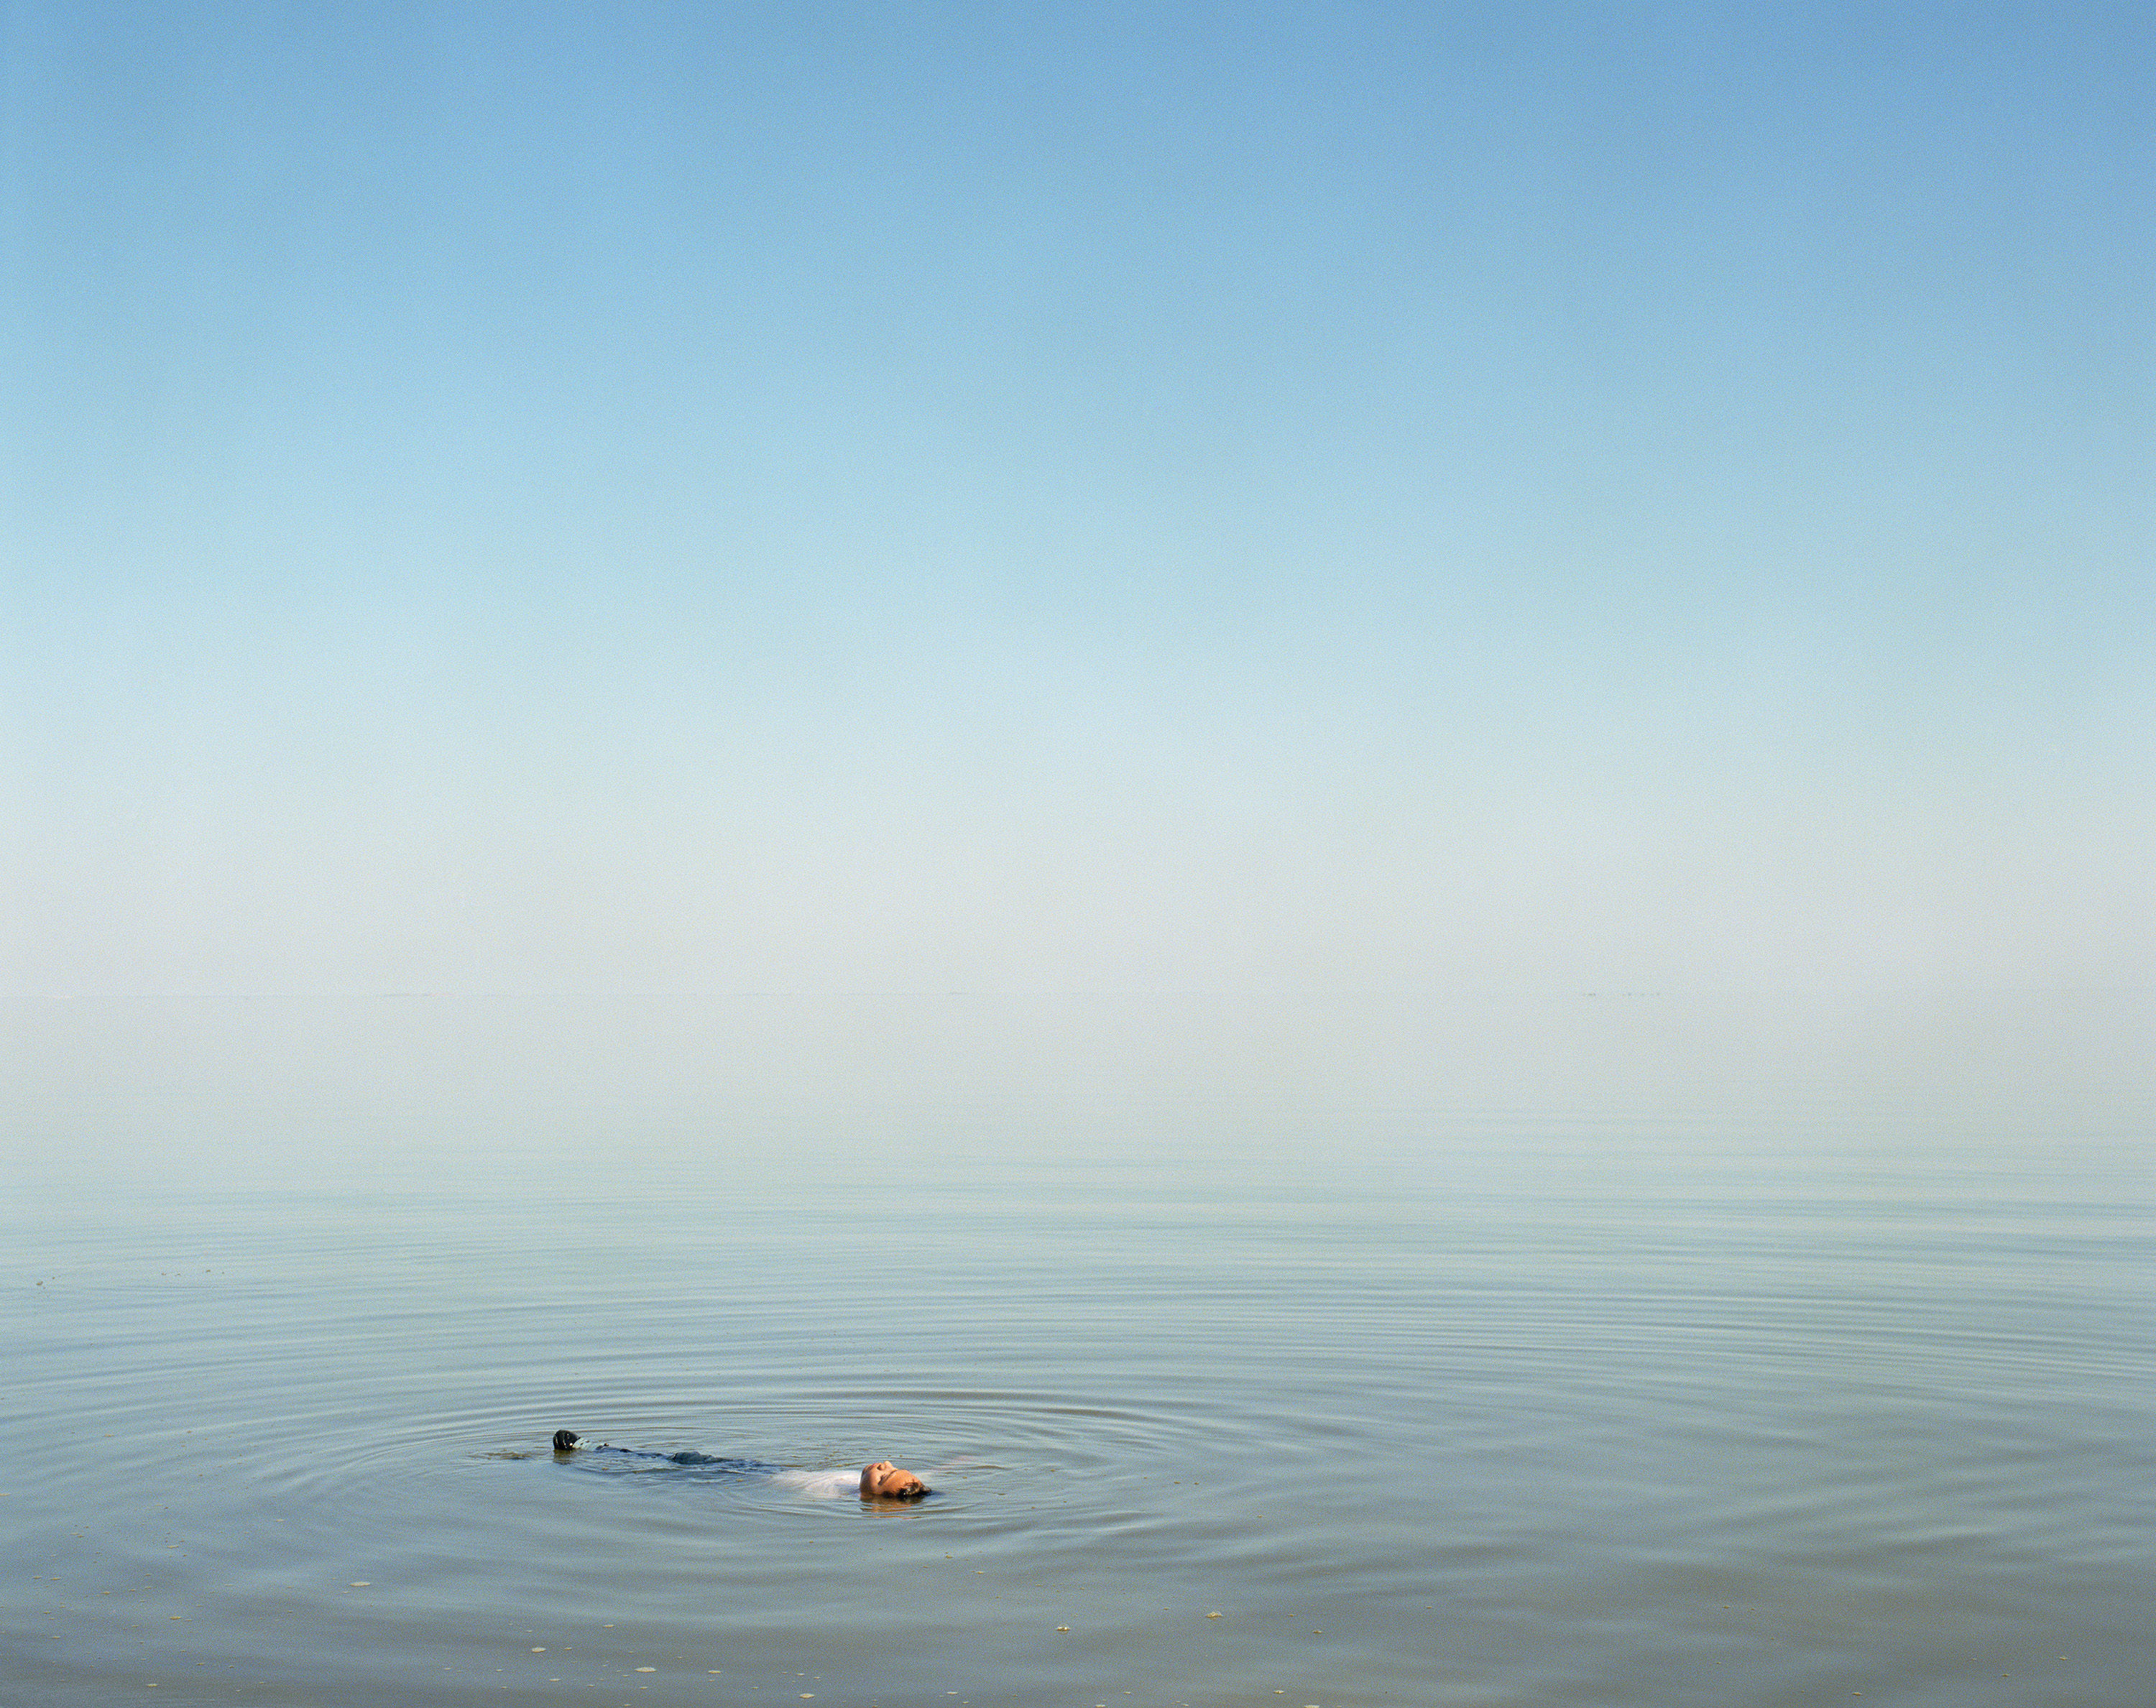 Ron Jude, 'Boy Floating in Water', 2012, from the series „Lago“, Archival Pigment Print, 90 x 112 cm 